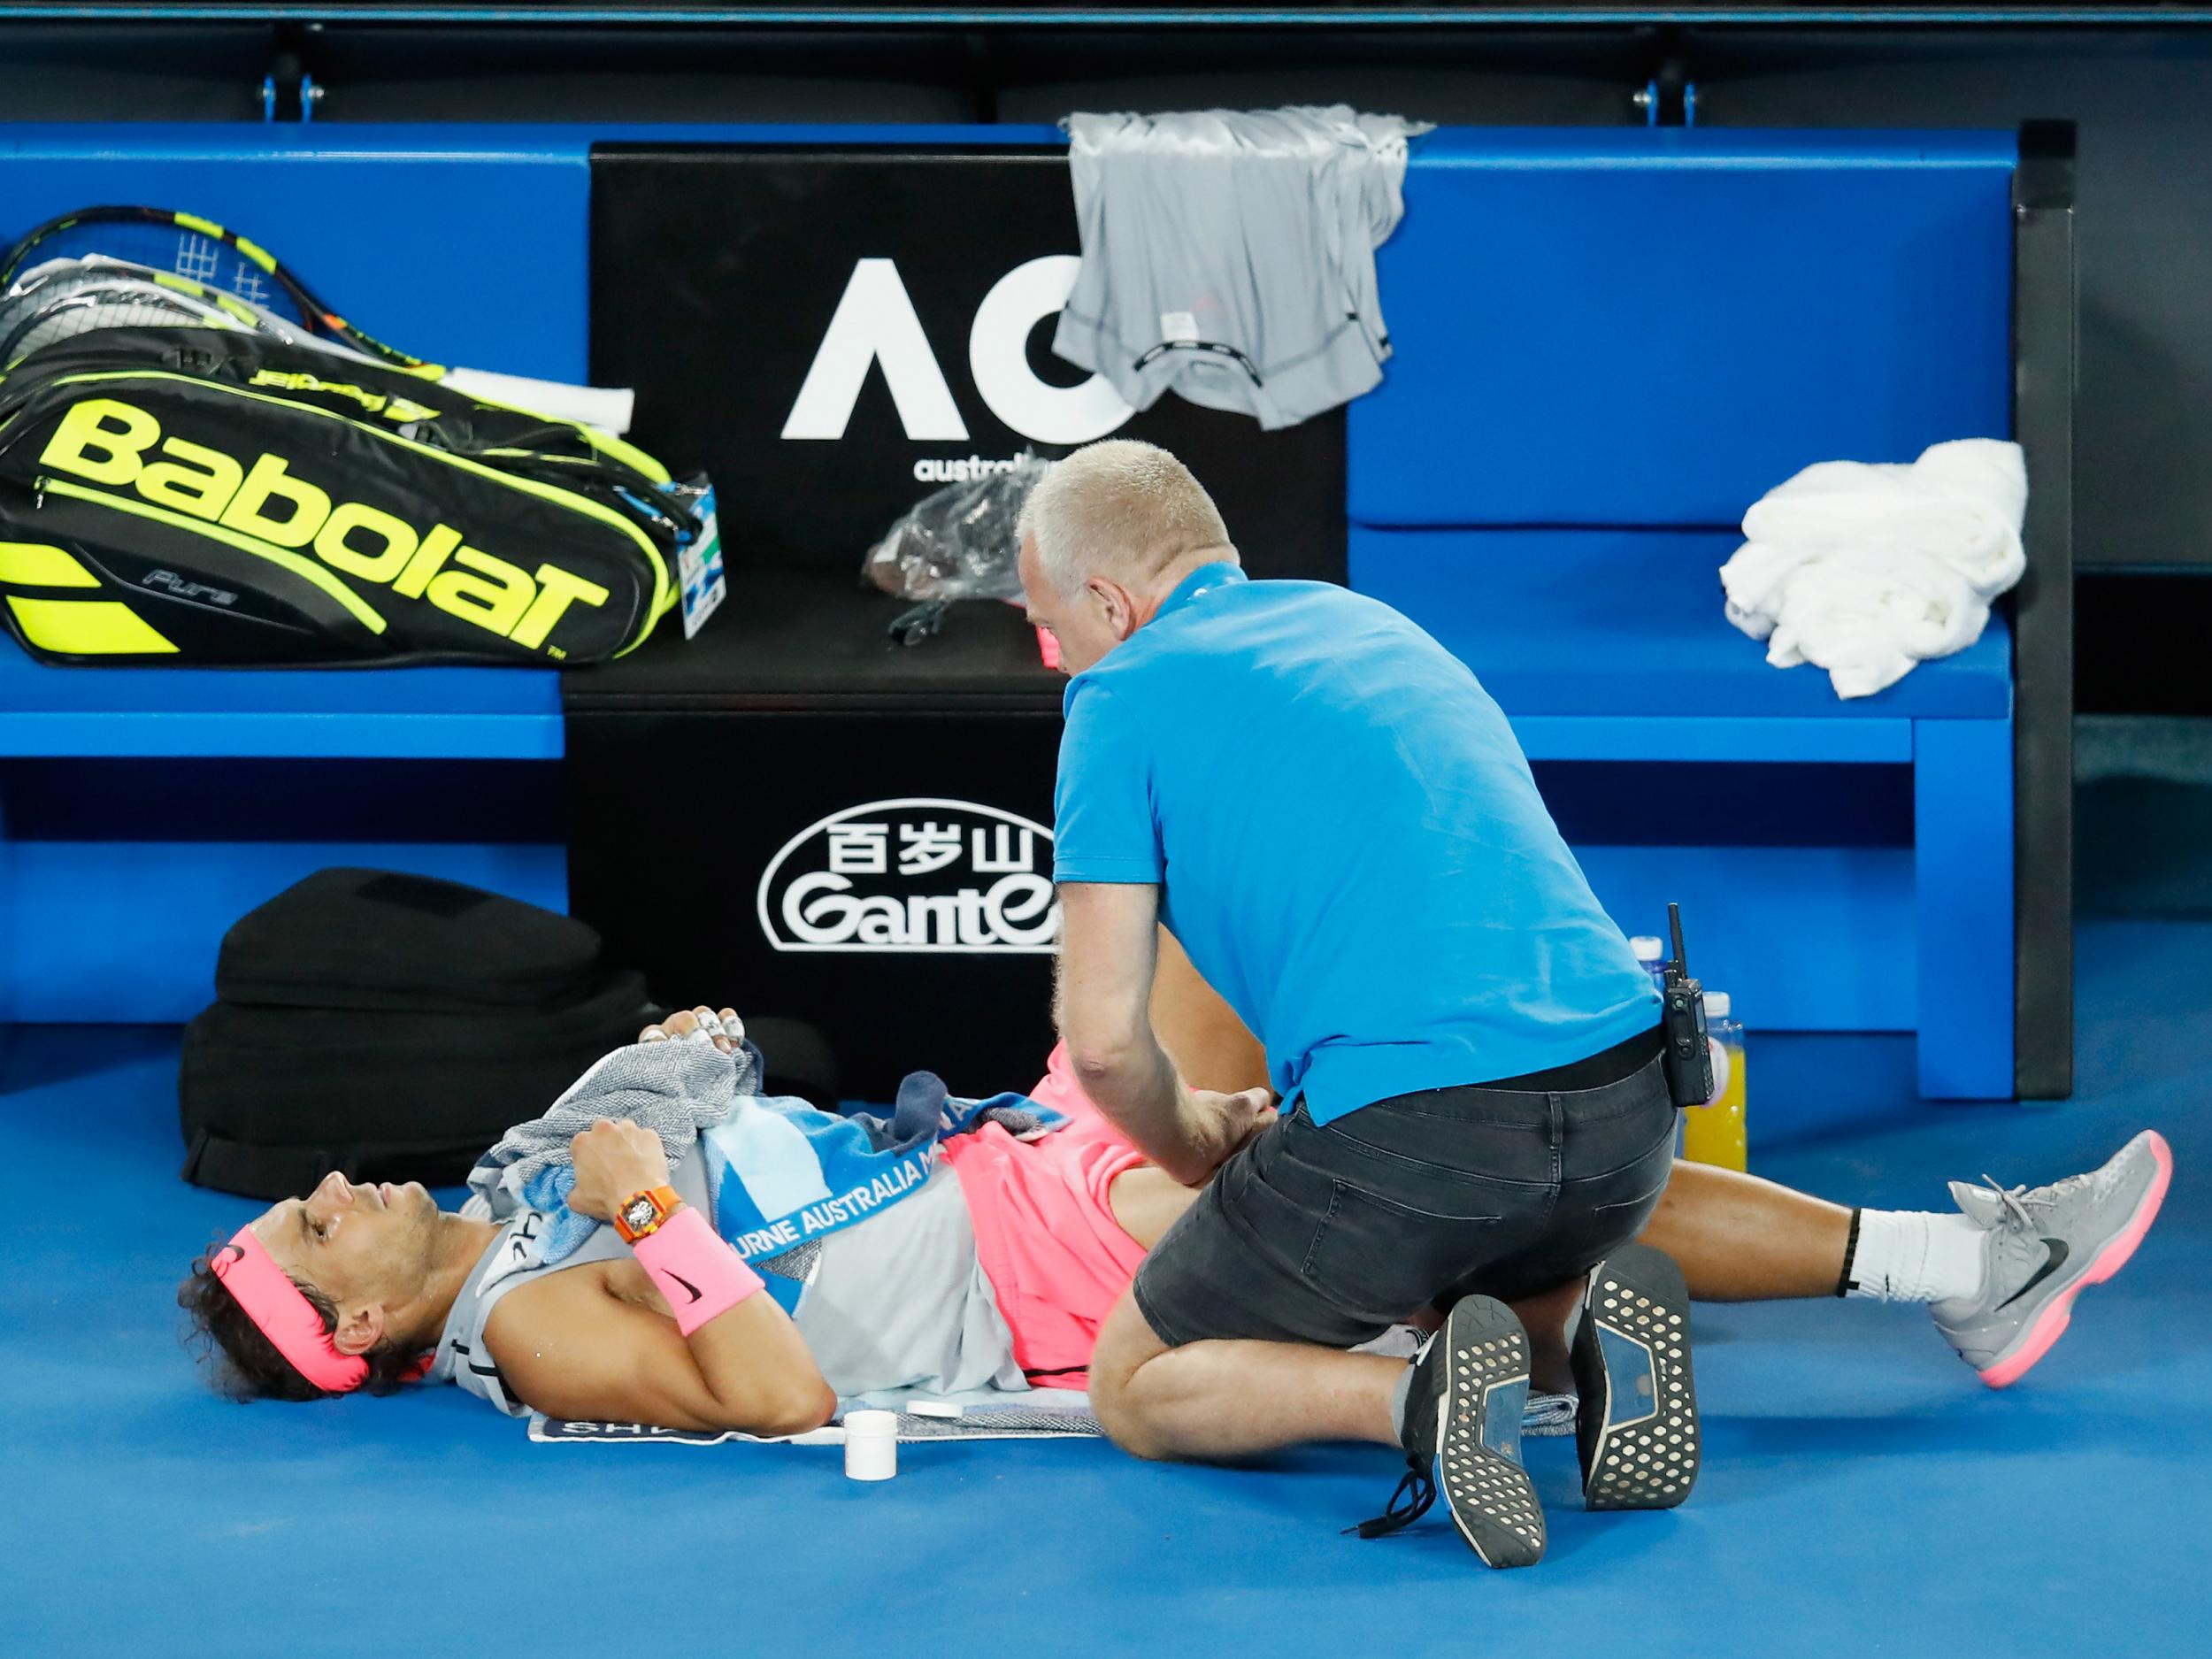 Rafael Nadal was forced to withdraw with injury (Getty)